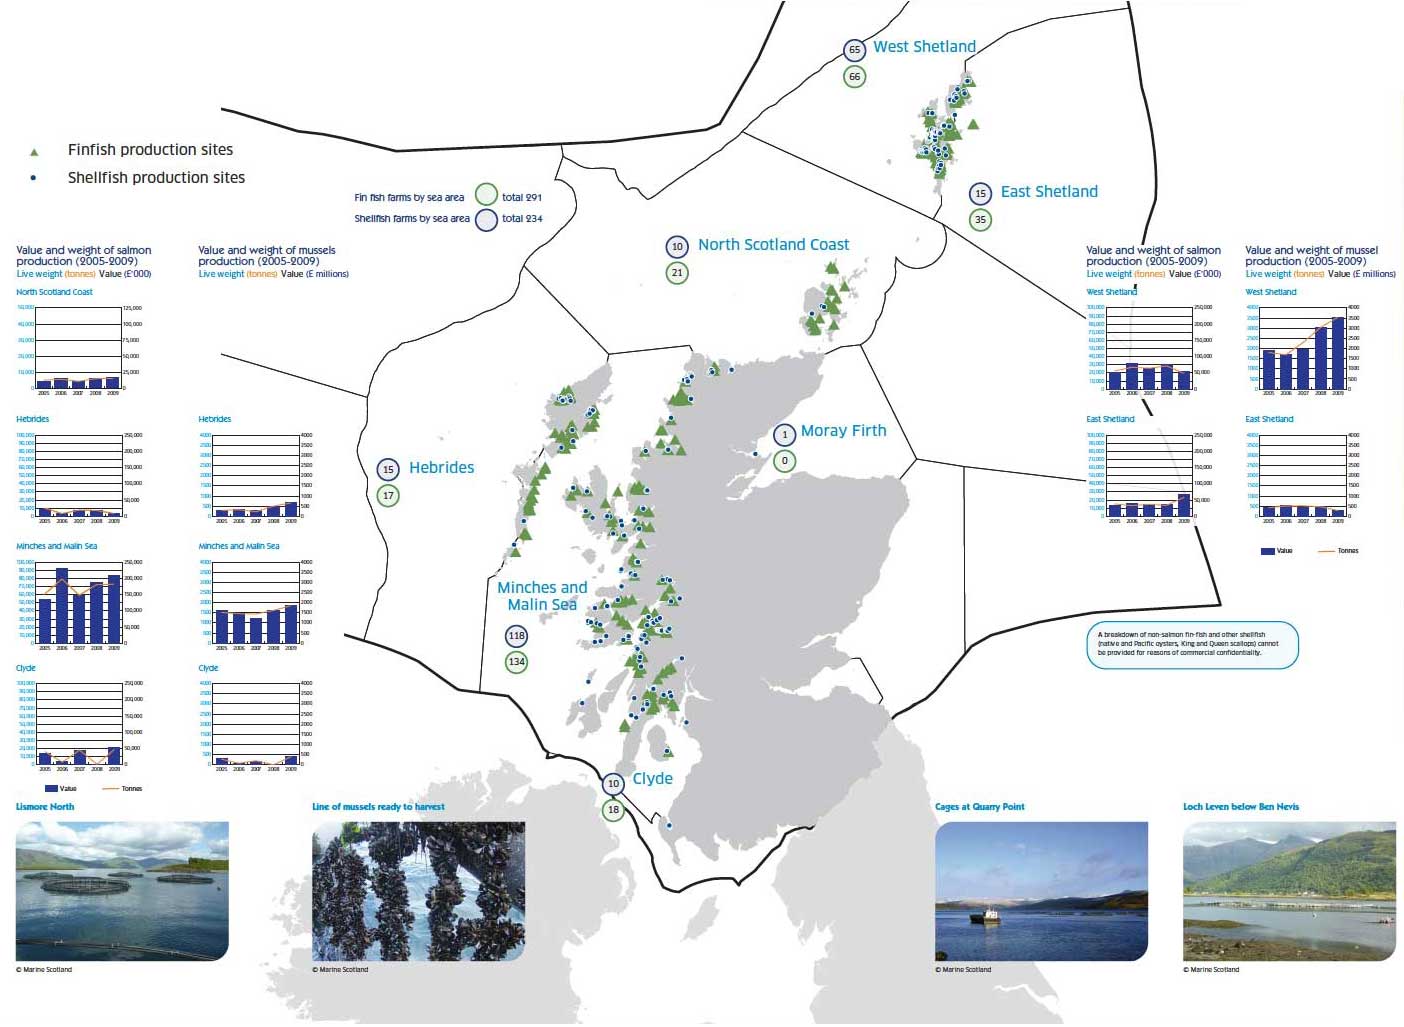 Locations and production figures of finfish and shellfish sites (2005-2009)